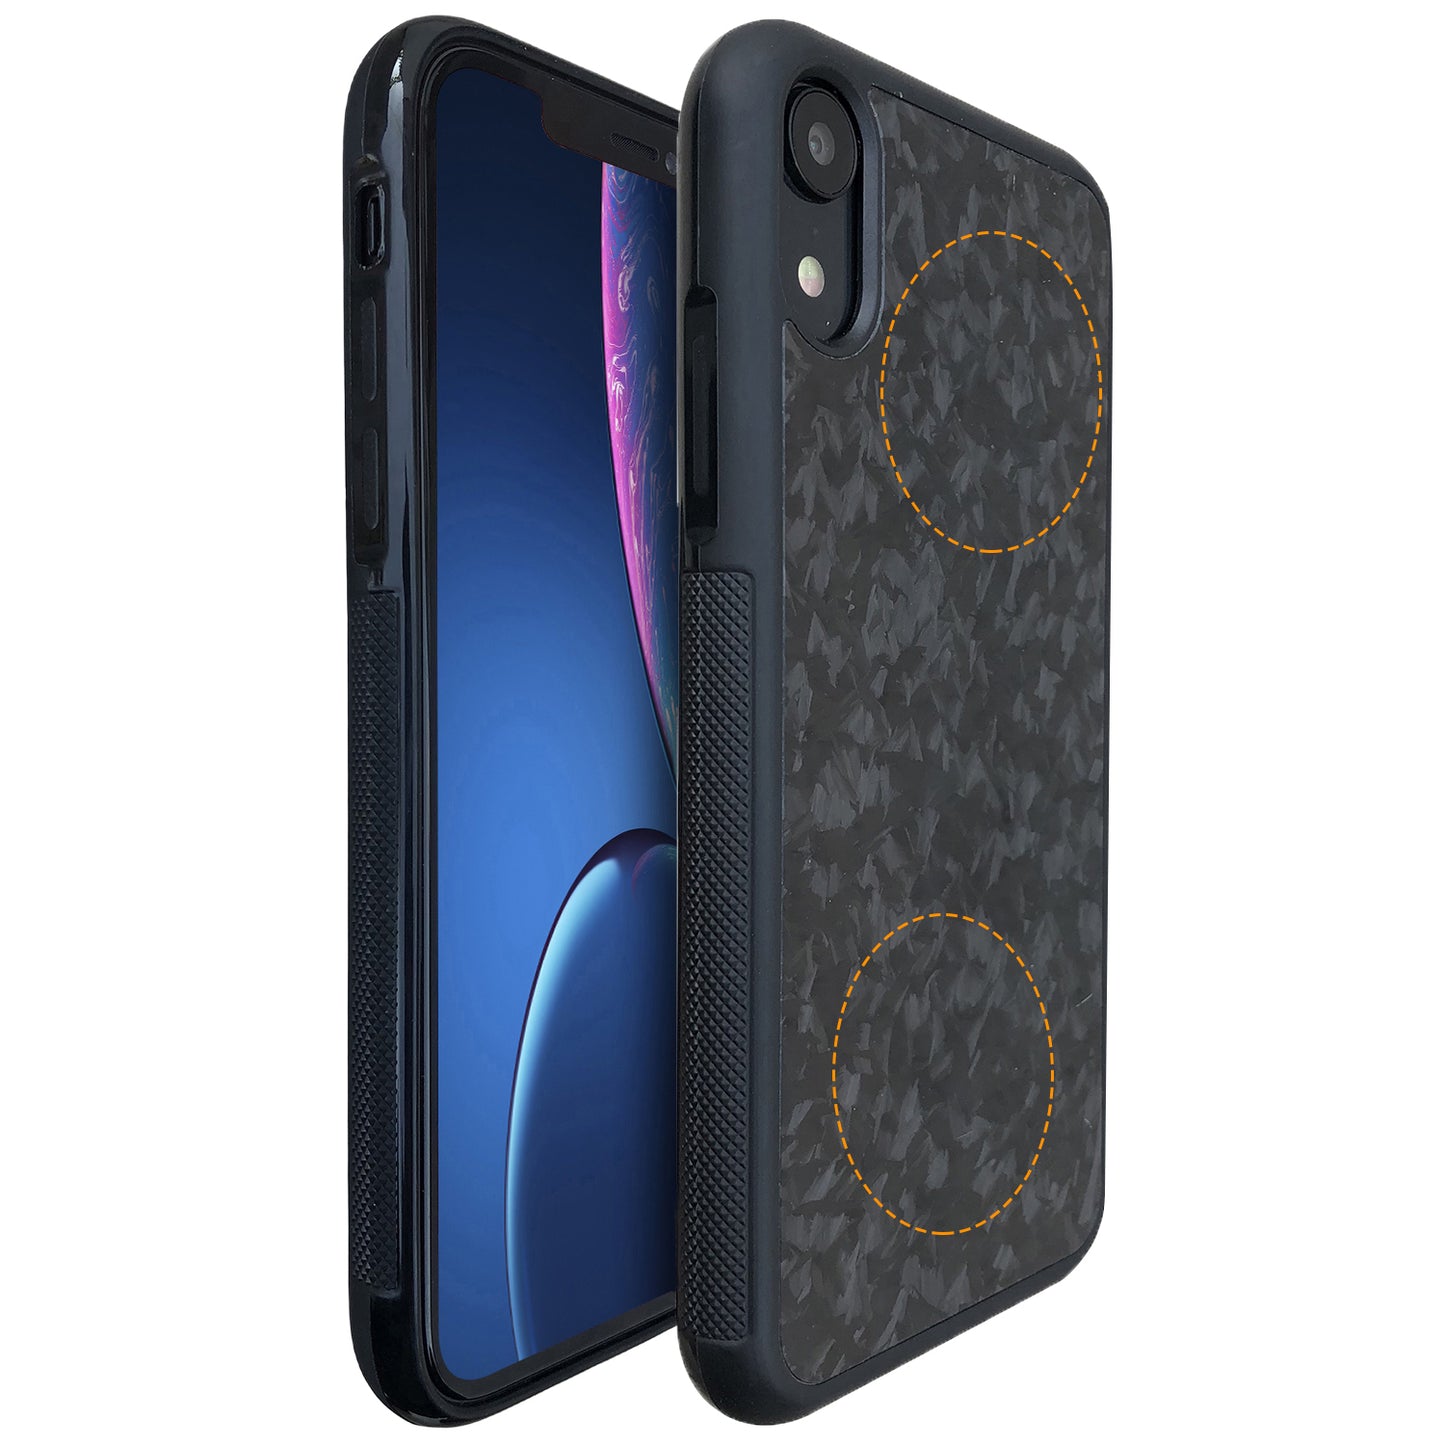 Molzar Grip Series iPhone XR with Real Forged Carbon Case